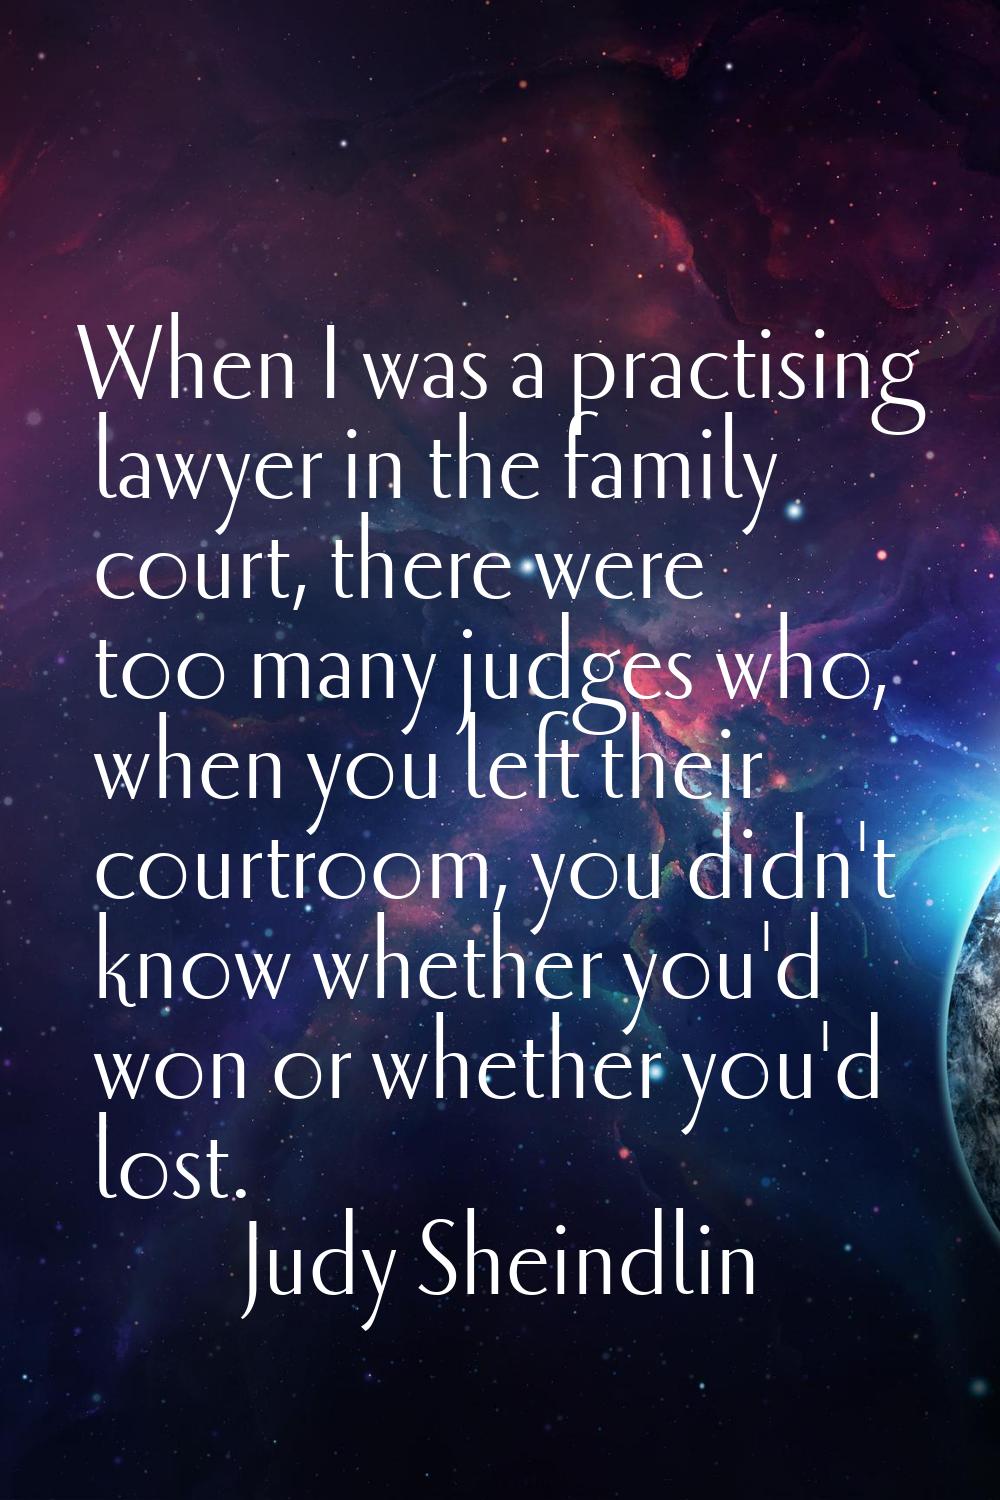 When I was a practising lawyer in the family court, there were too many judges who, when you left t